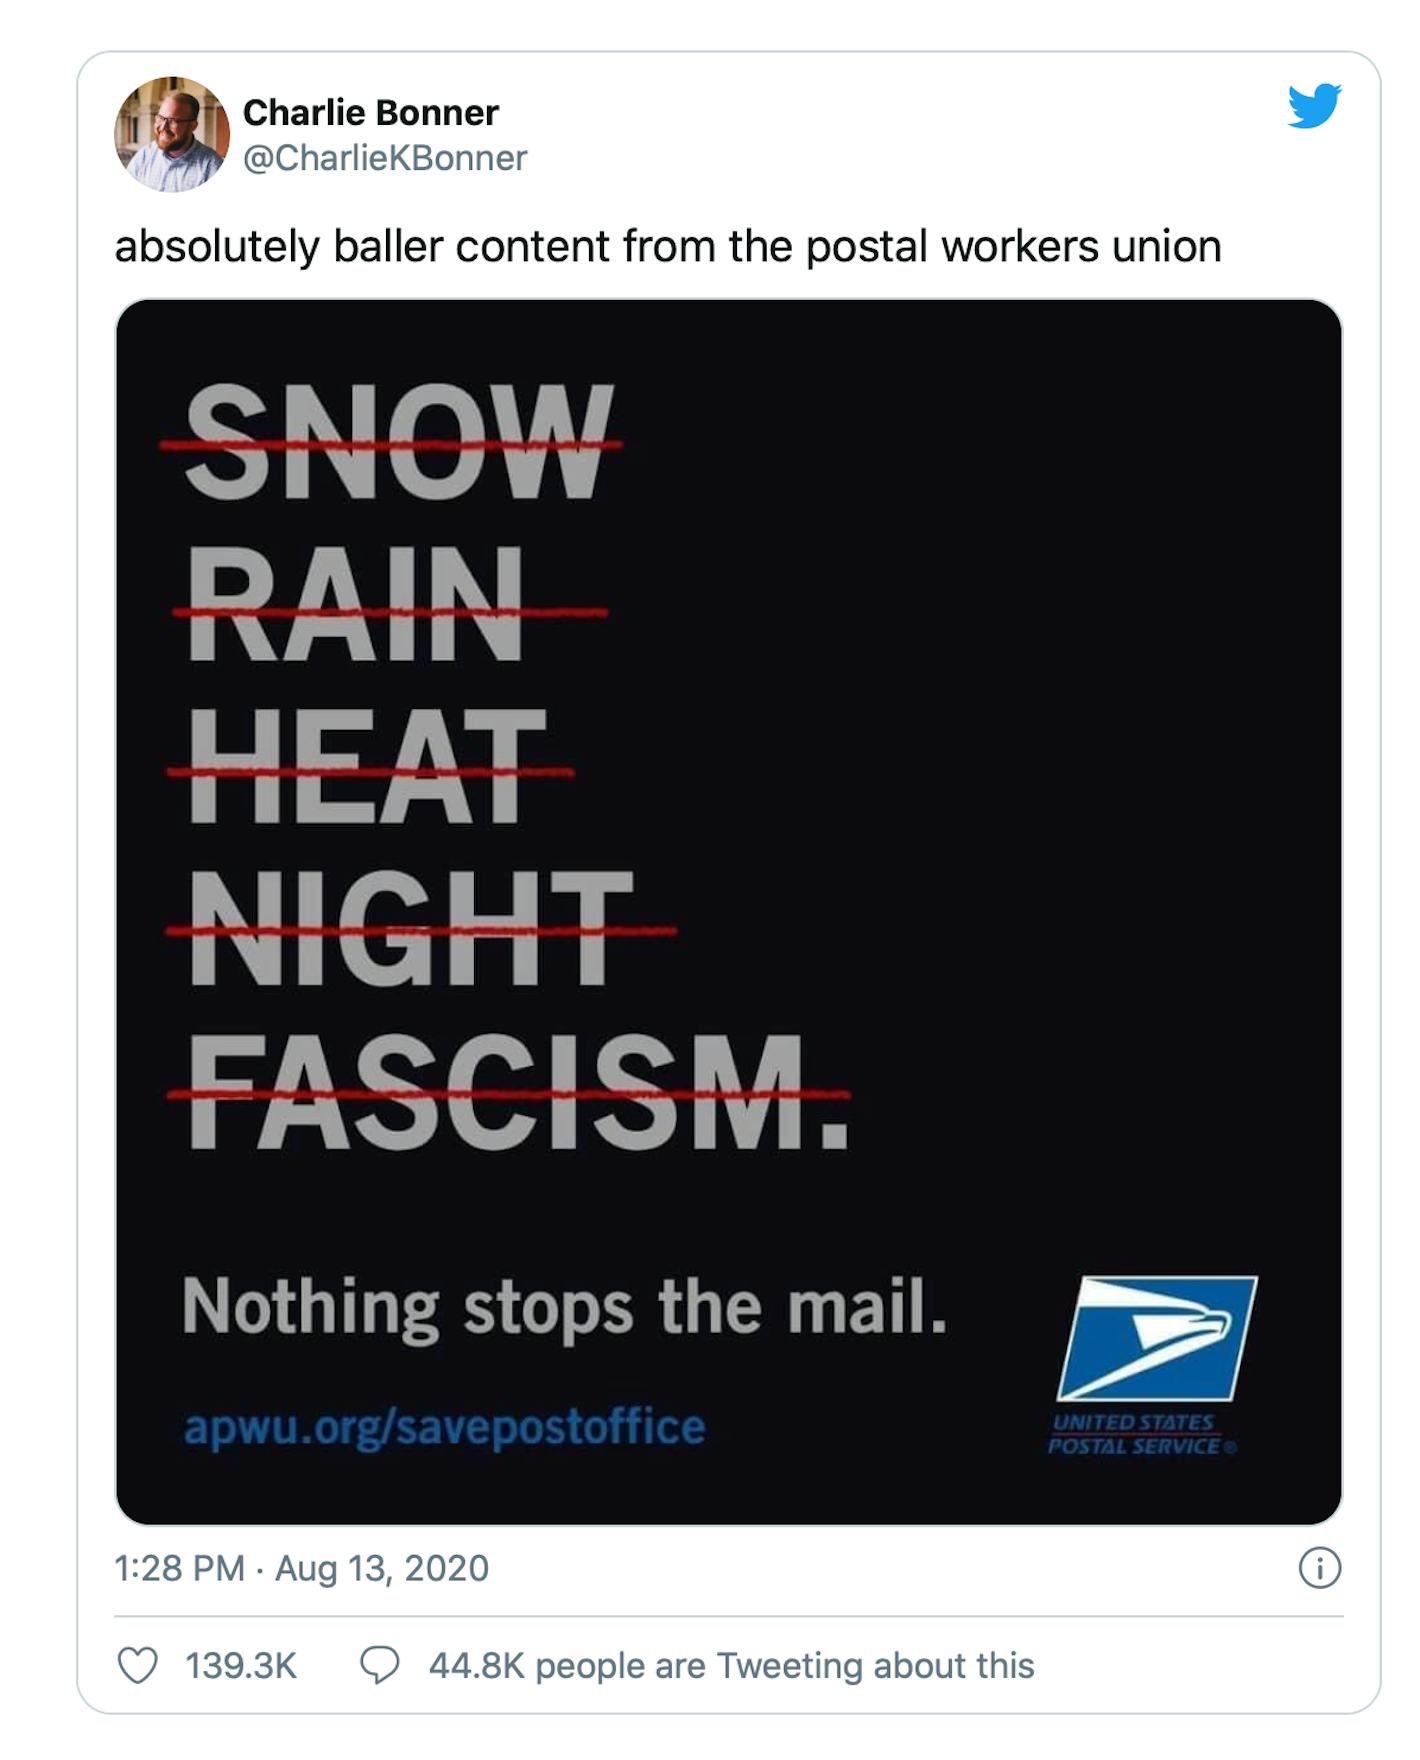 USPS is shutting down mailsorting machines right before the surge of